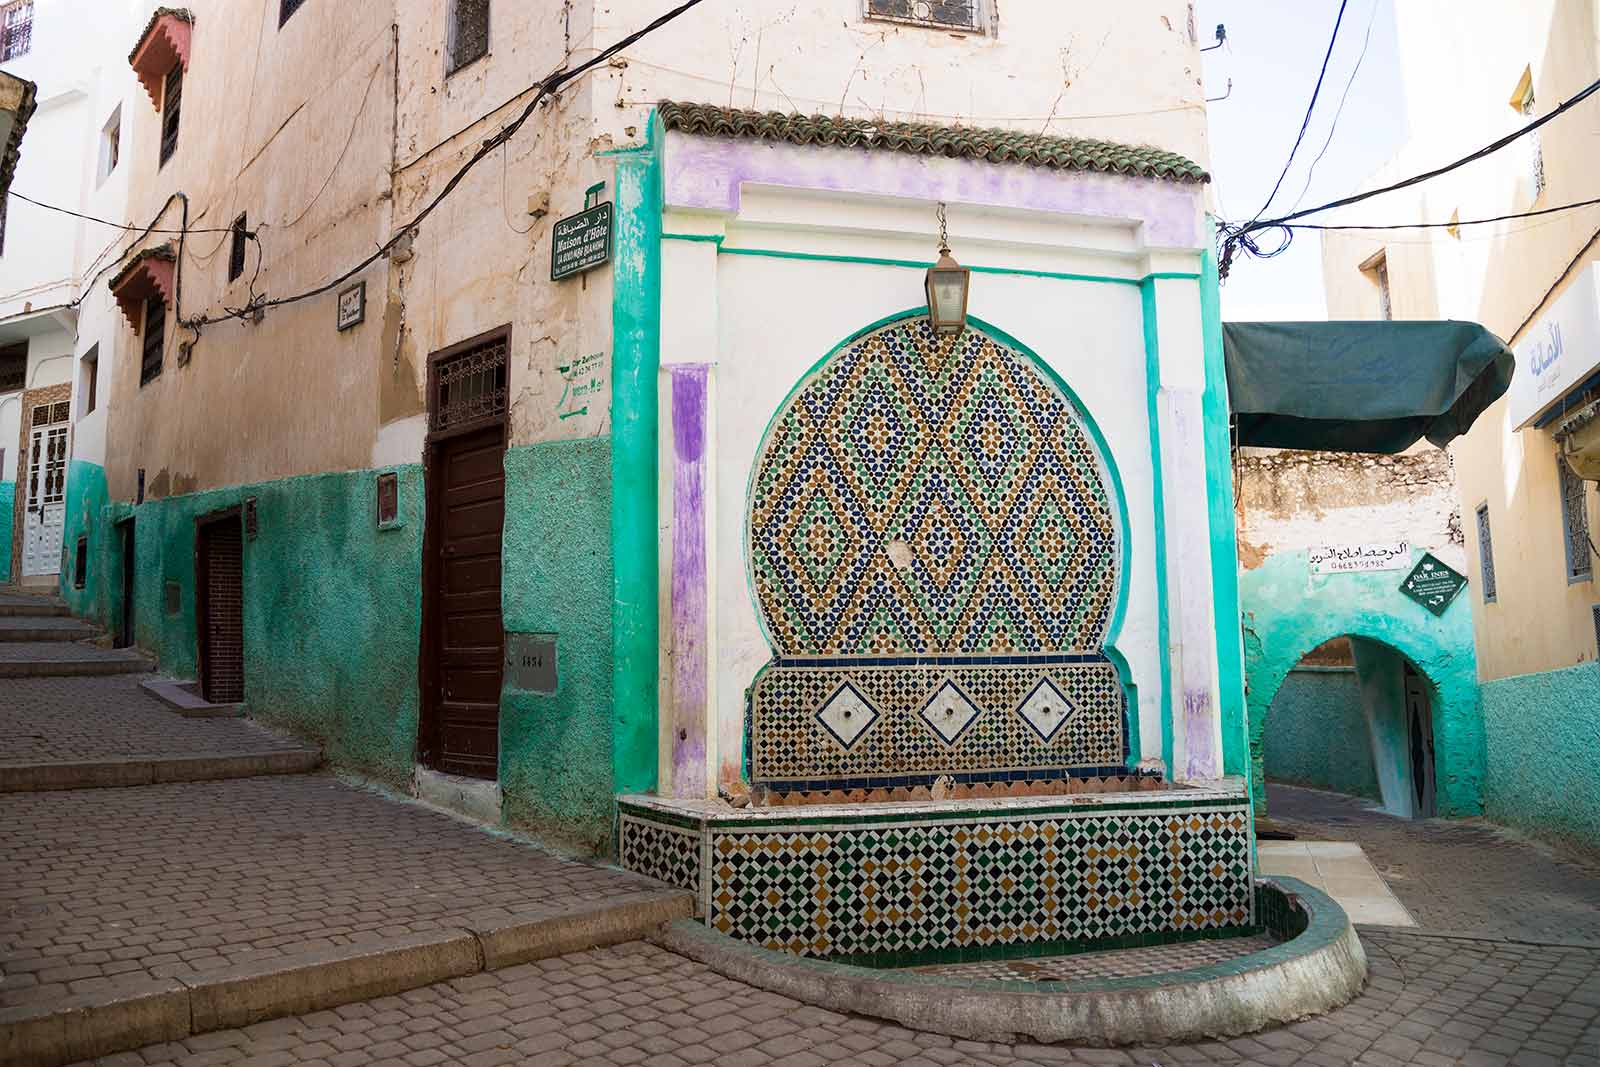 In the medina quarter of Moulay Idriss you will find many colourful streets that are the perfect photo spot.